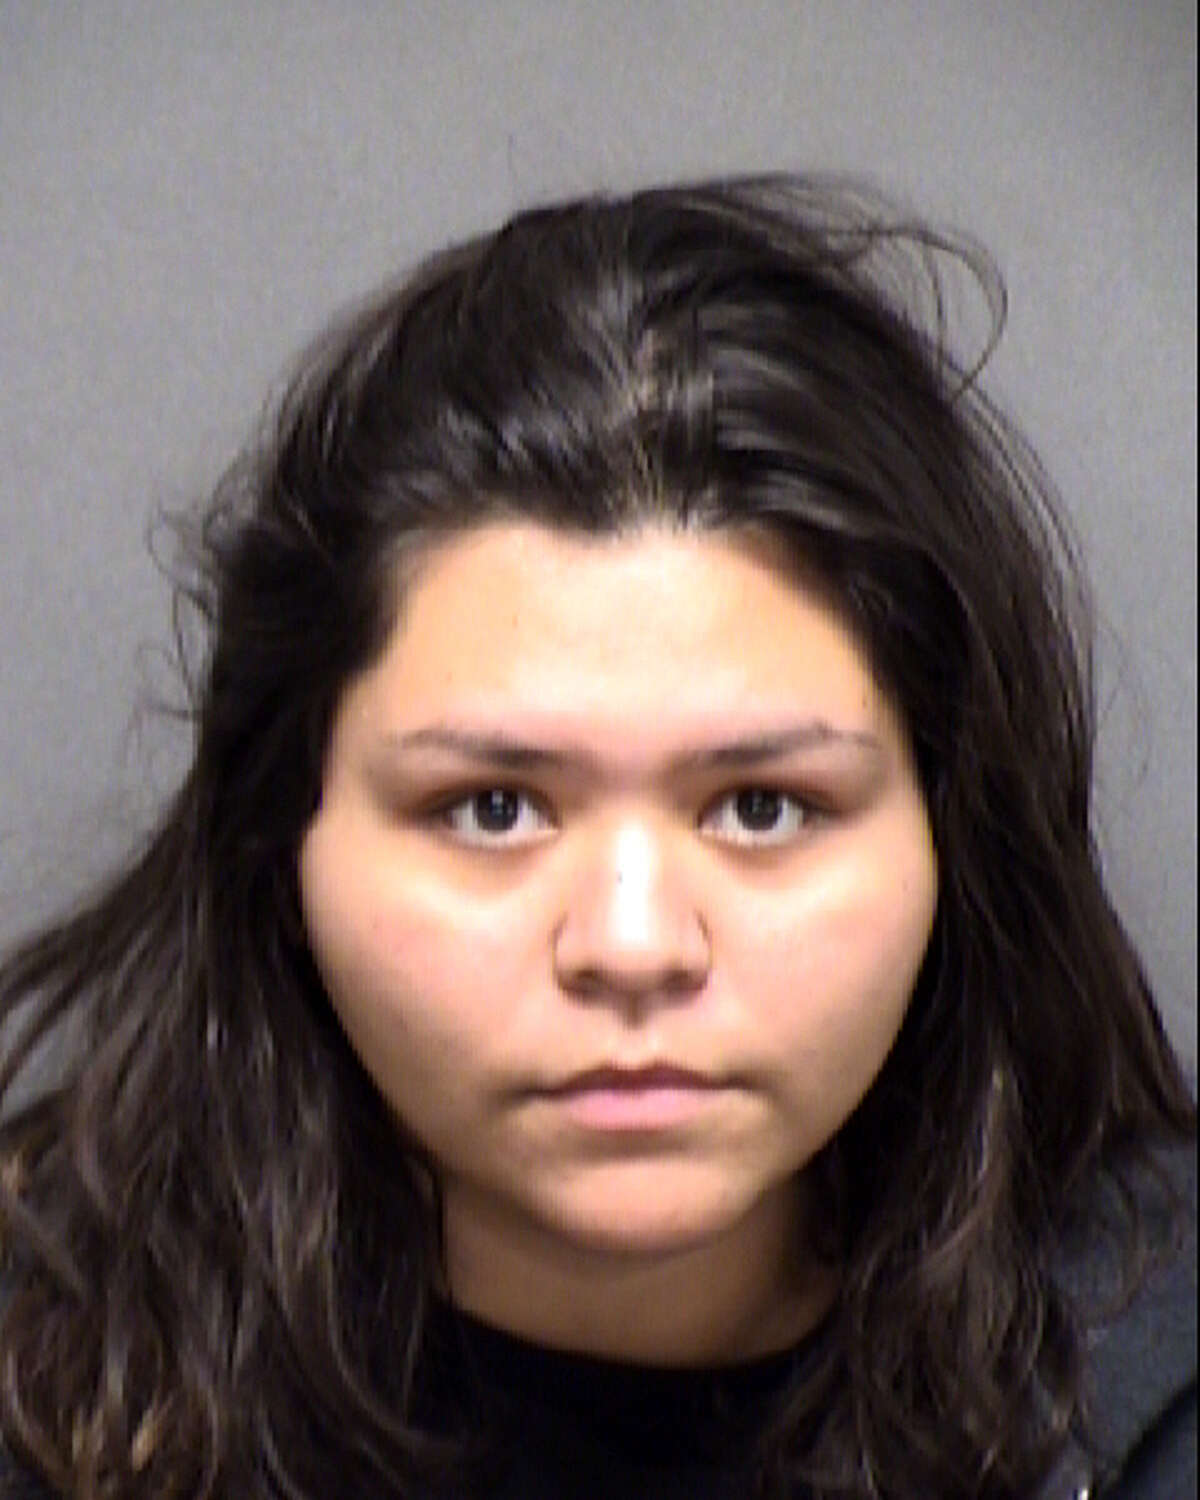 Alissa Weese, 22, was charged with capital murder in connection with the shooting death of a teenage mother.